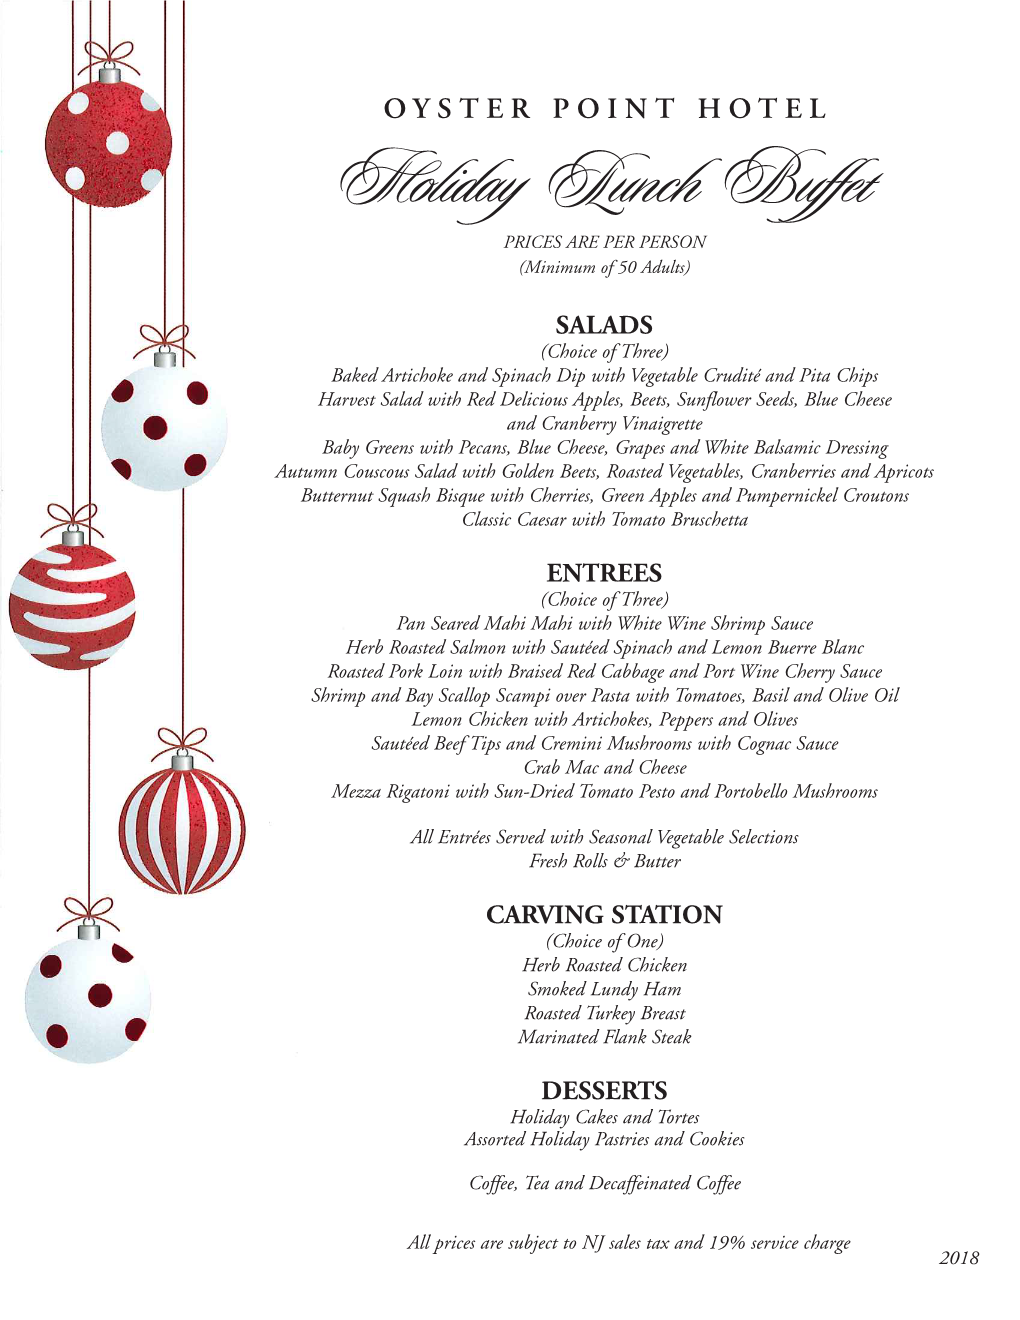 Holiday Lunch Buffet PRICES ARE PER PERSON (Minimum of 50 Adults)